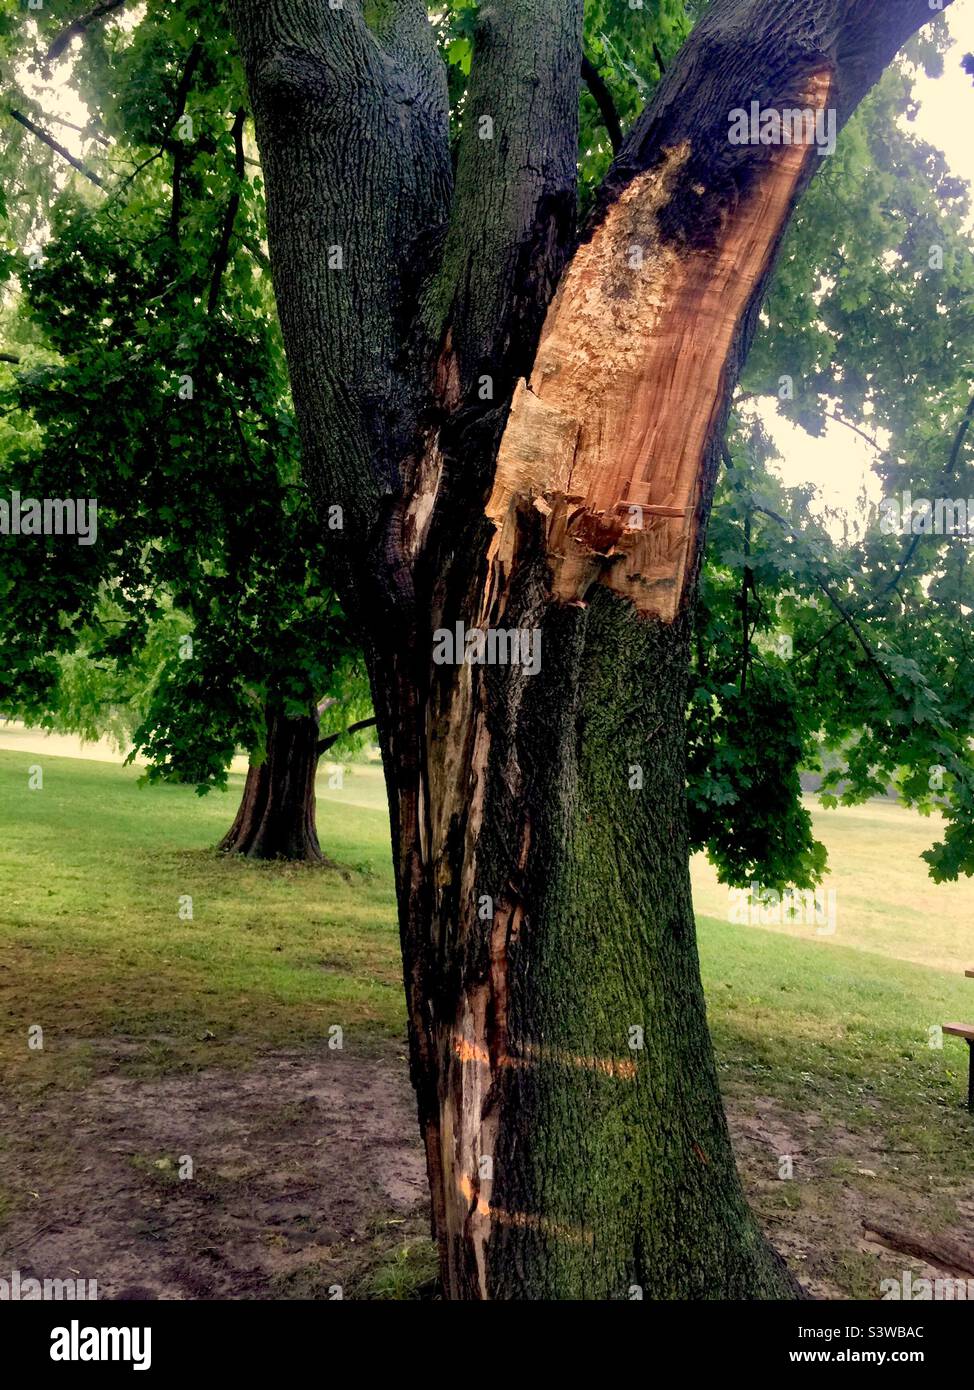 Mature tree damaged by storm marked for cutting down in an urban park, Ontario, Canada. Stock Photo